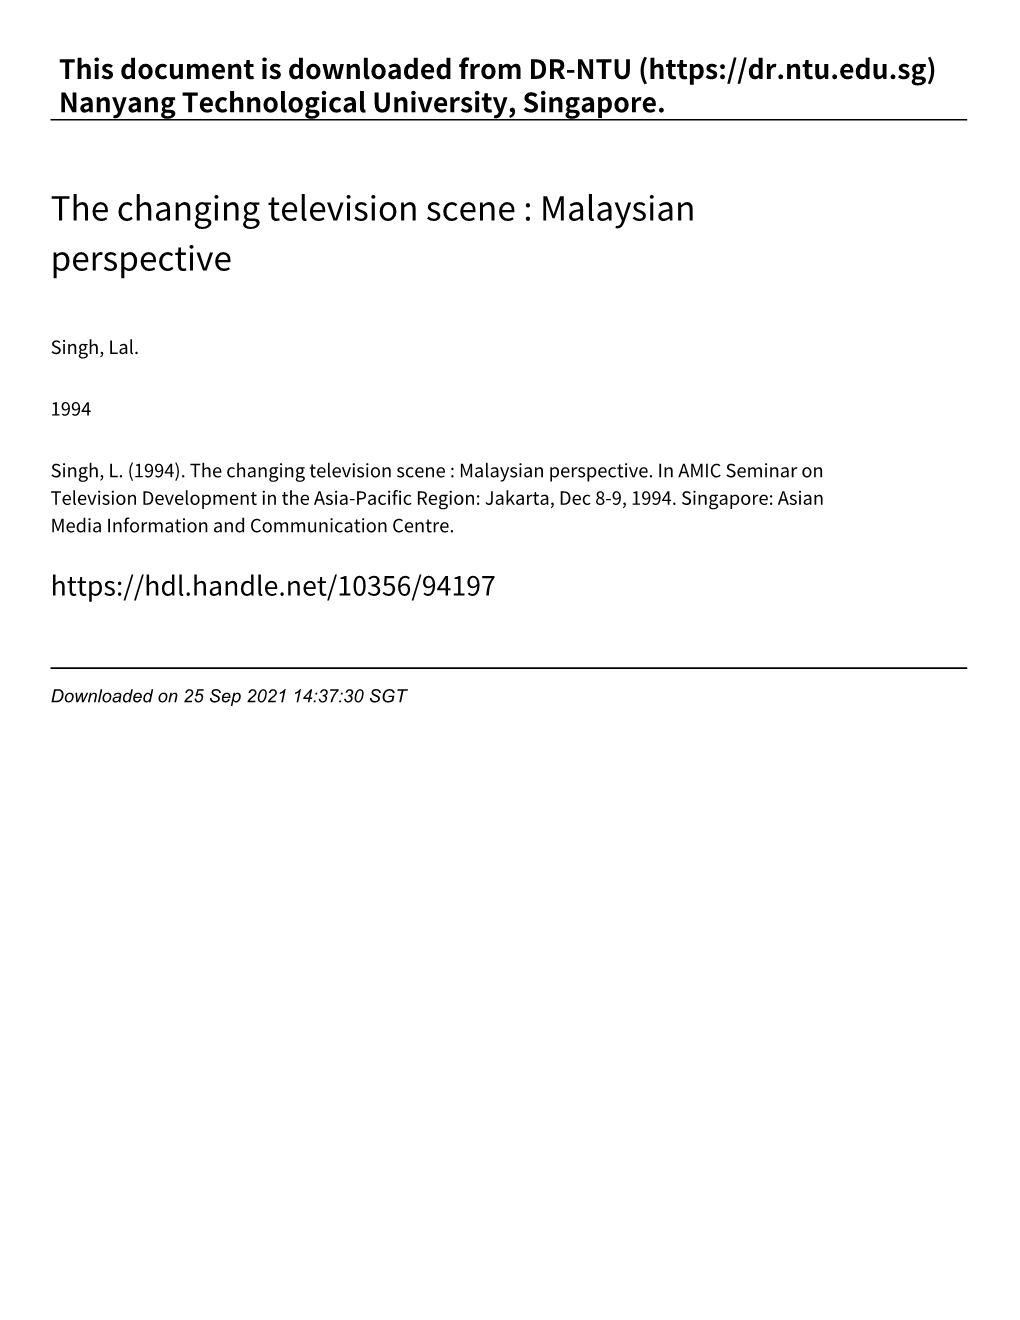 The Changing Television Scene : Malaysian Perspective